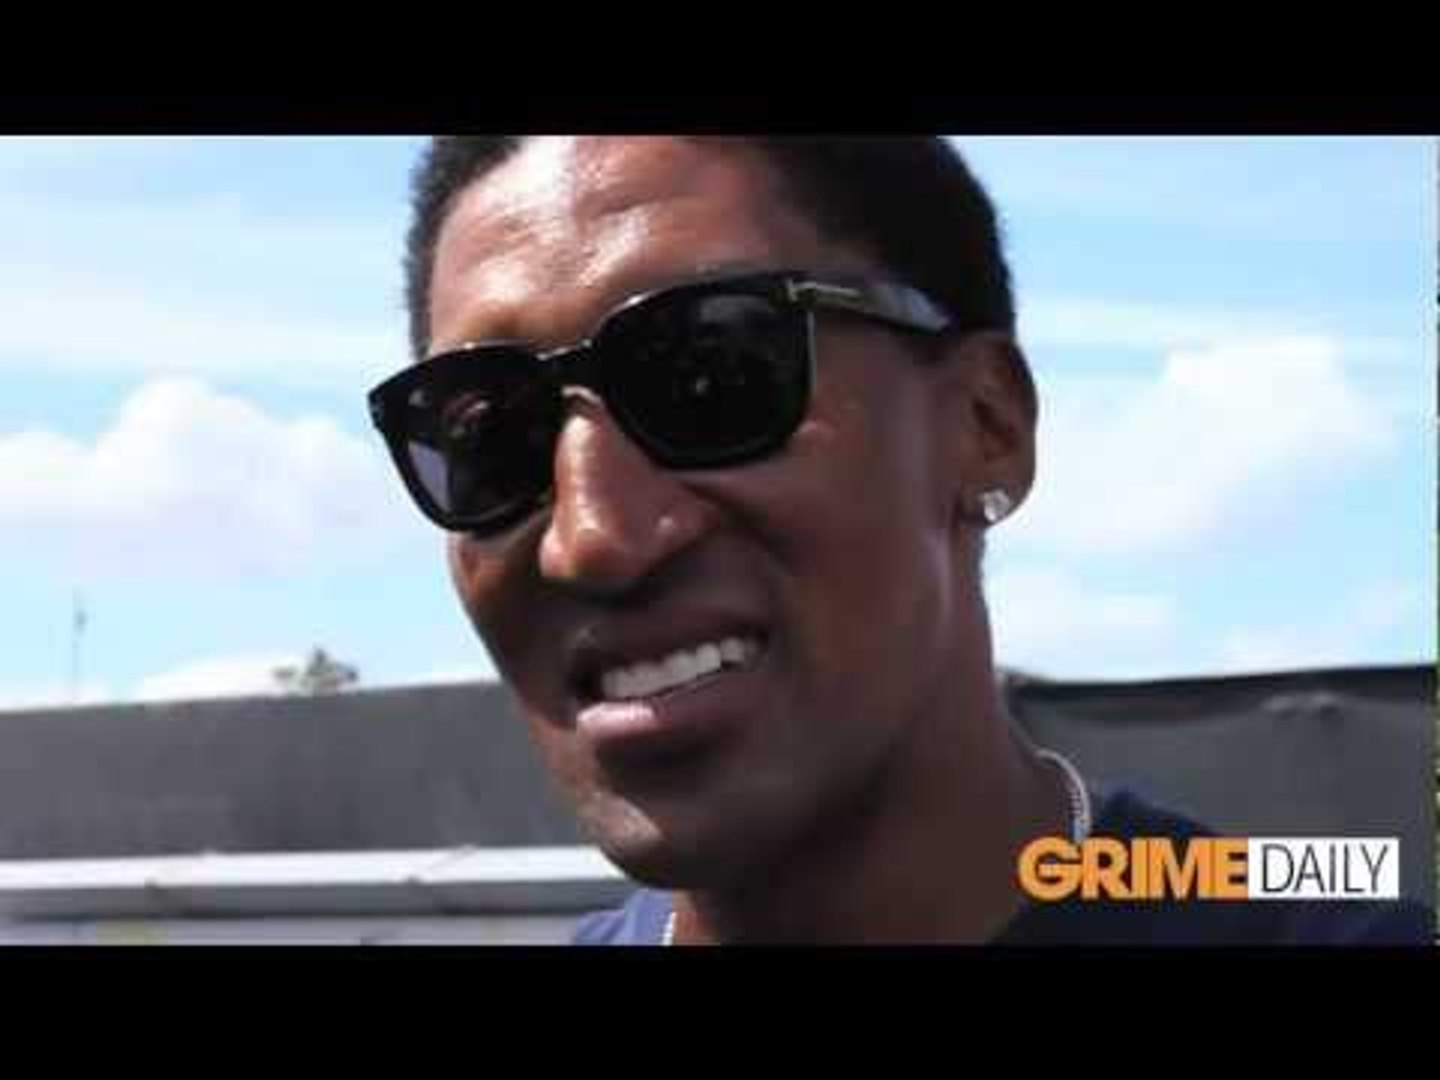 ⁣[GRIMEDAILY] - SNAKEYMAN AT THE NIKE BASKETBALL FESTIVAL - BIG BOI (OUTKAST), SCOTTIE PIPPEN & M